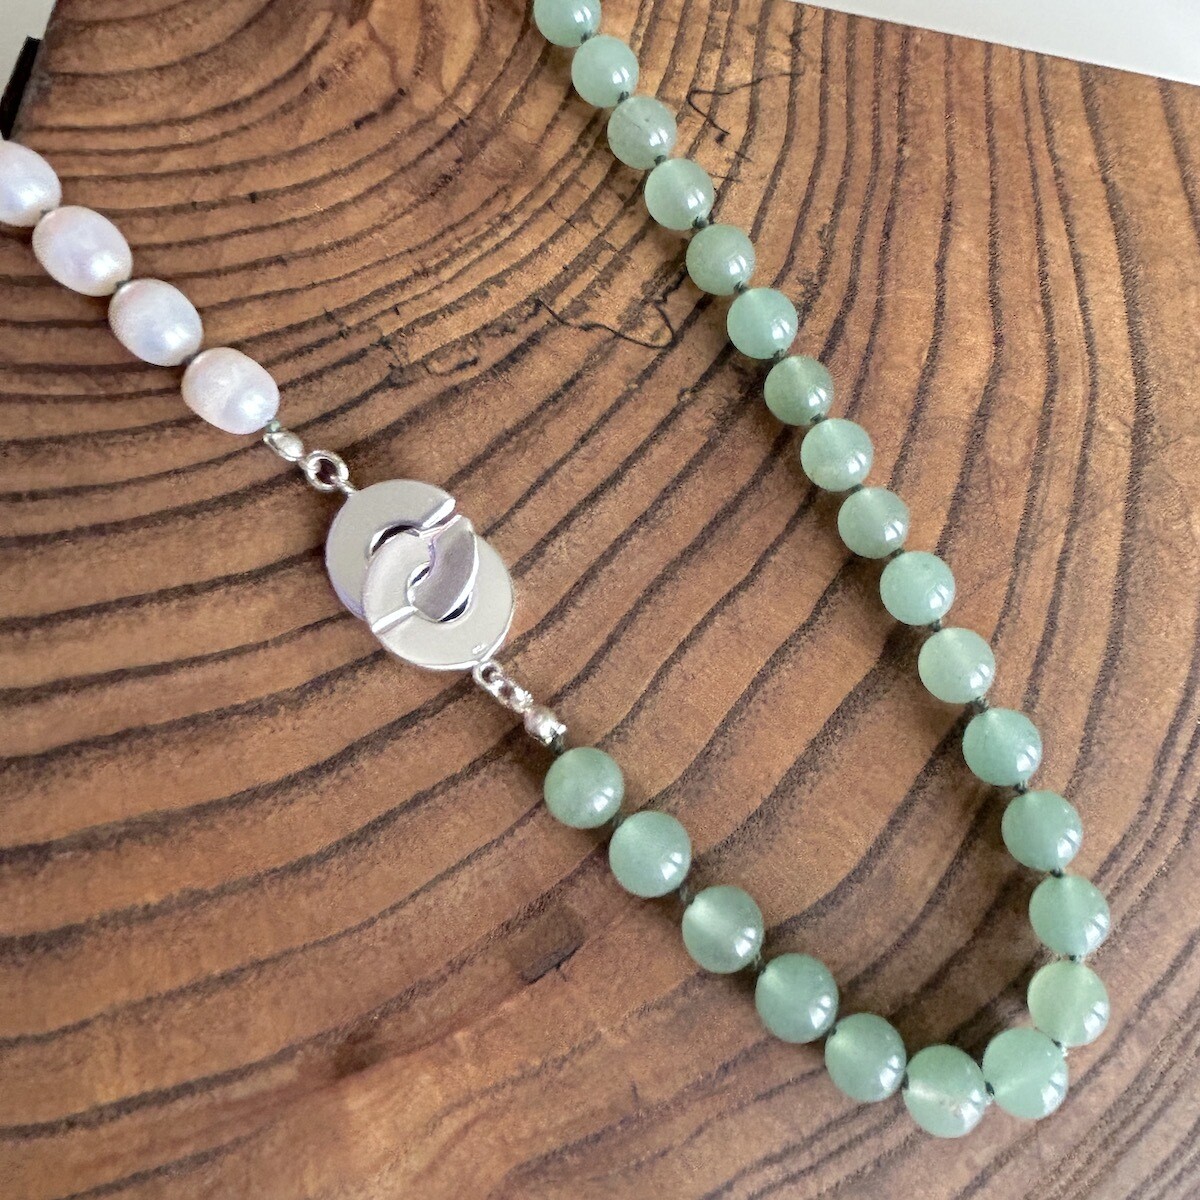 Handmade Silver Necklace with 1/2 white pearls. 1/2 aventurine knotted on green silk, interlocking c clasp